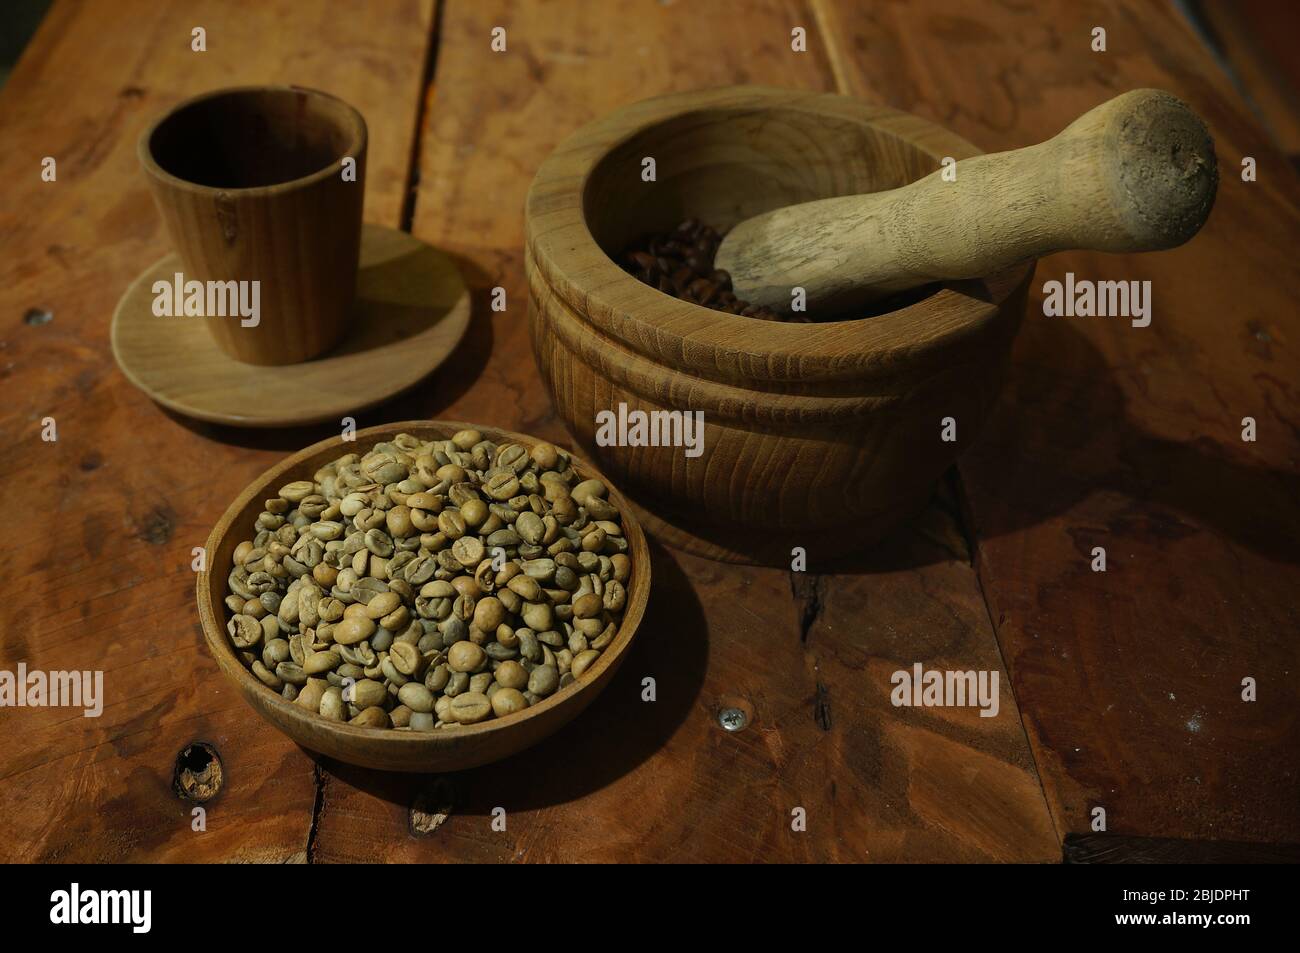 roasted coffee beans and raw ones Stock Photo